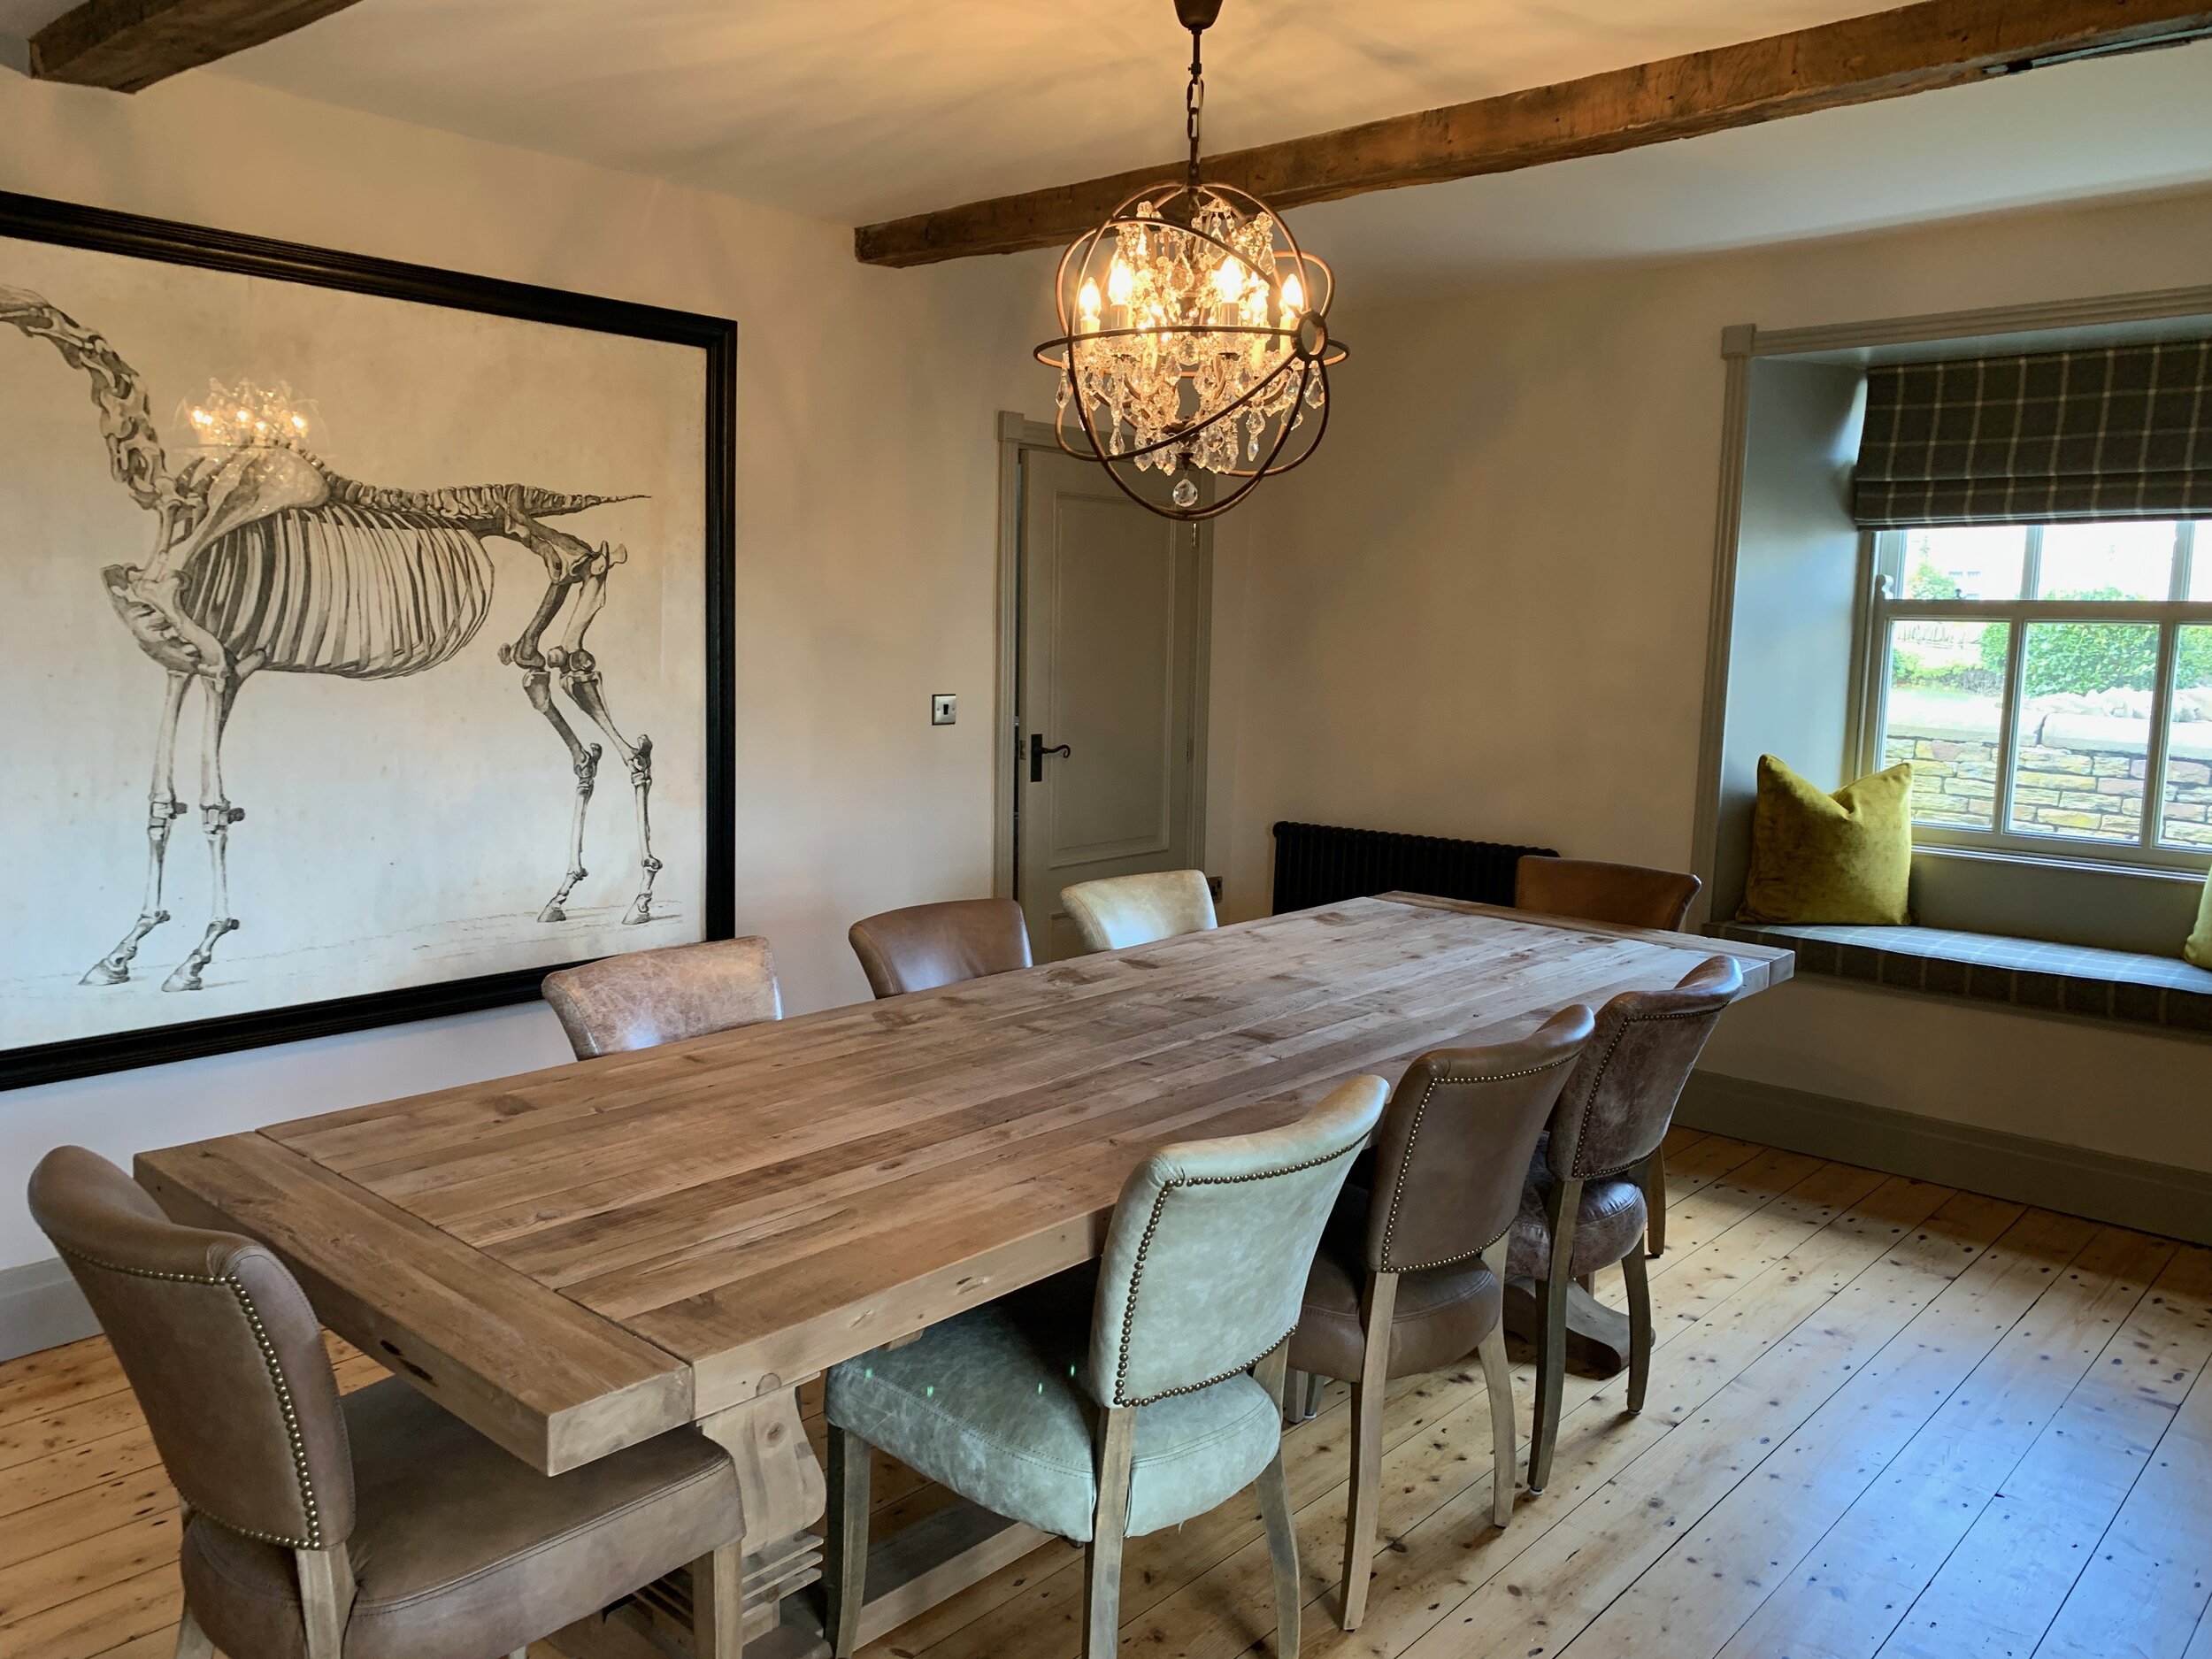 Bespoke Dining Rooms Yorkshire